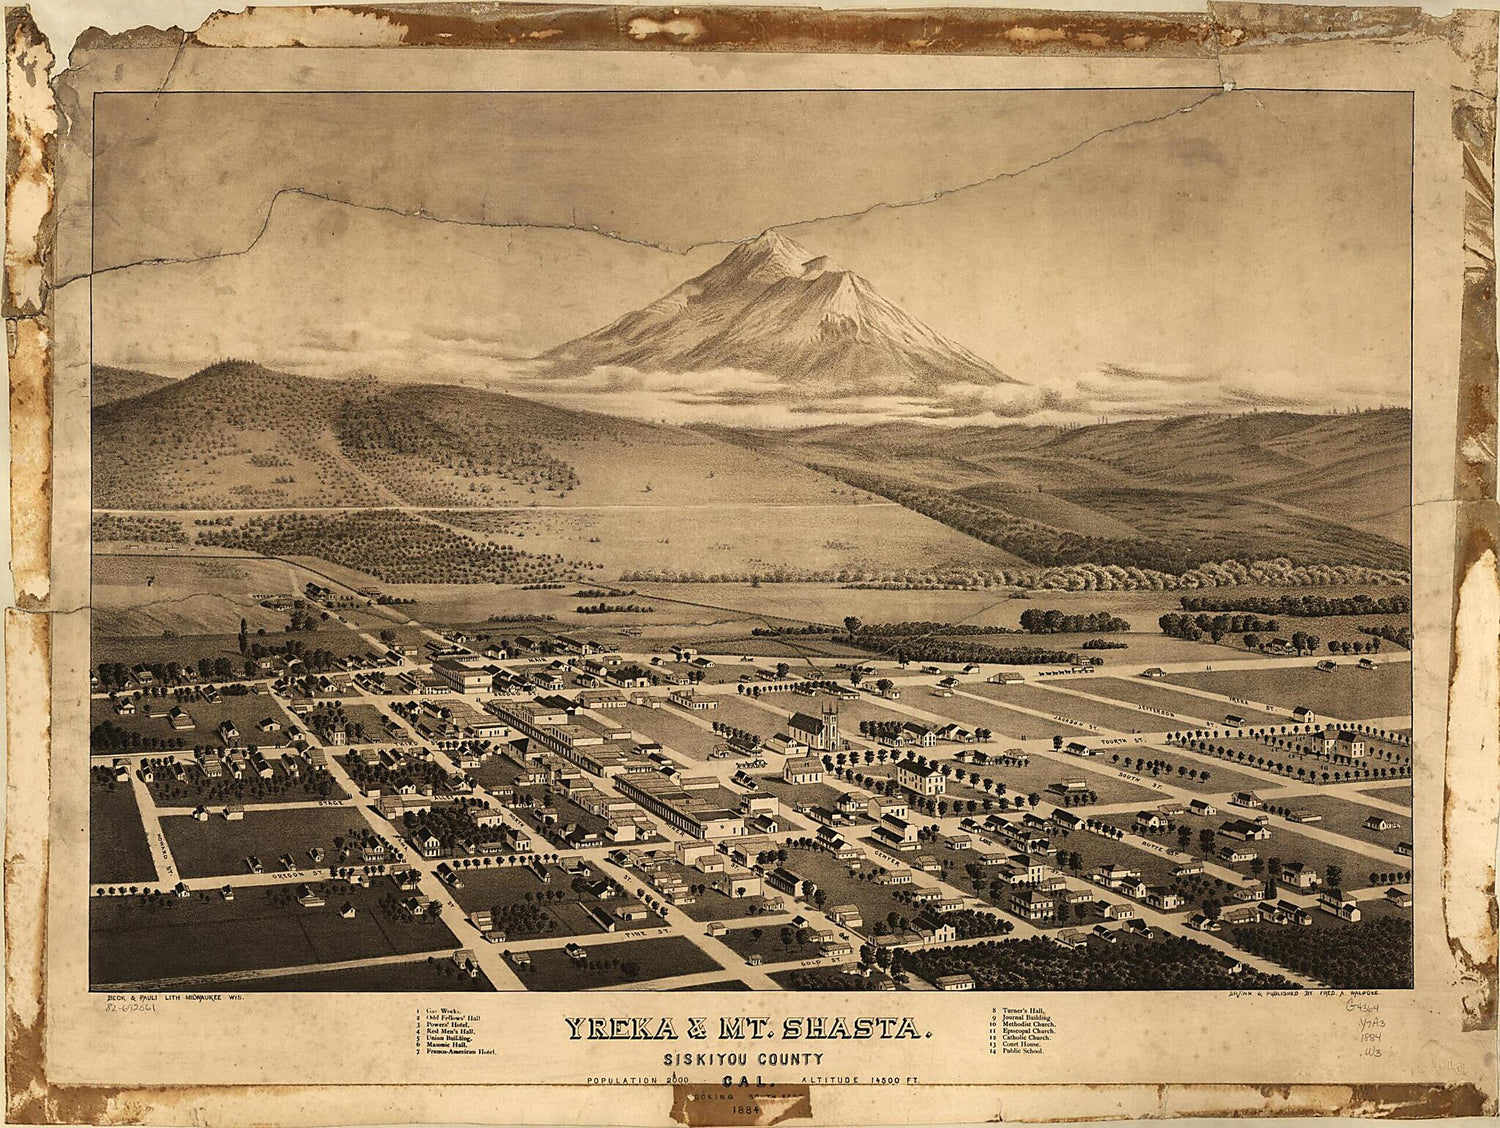 This old map of Yreka &amp; Mt. Shasta, Siskiyou County,California, Looking South East from 1884 was created by  Beck &amp; Pauli, Fred A. Walpole in 1884